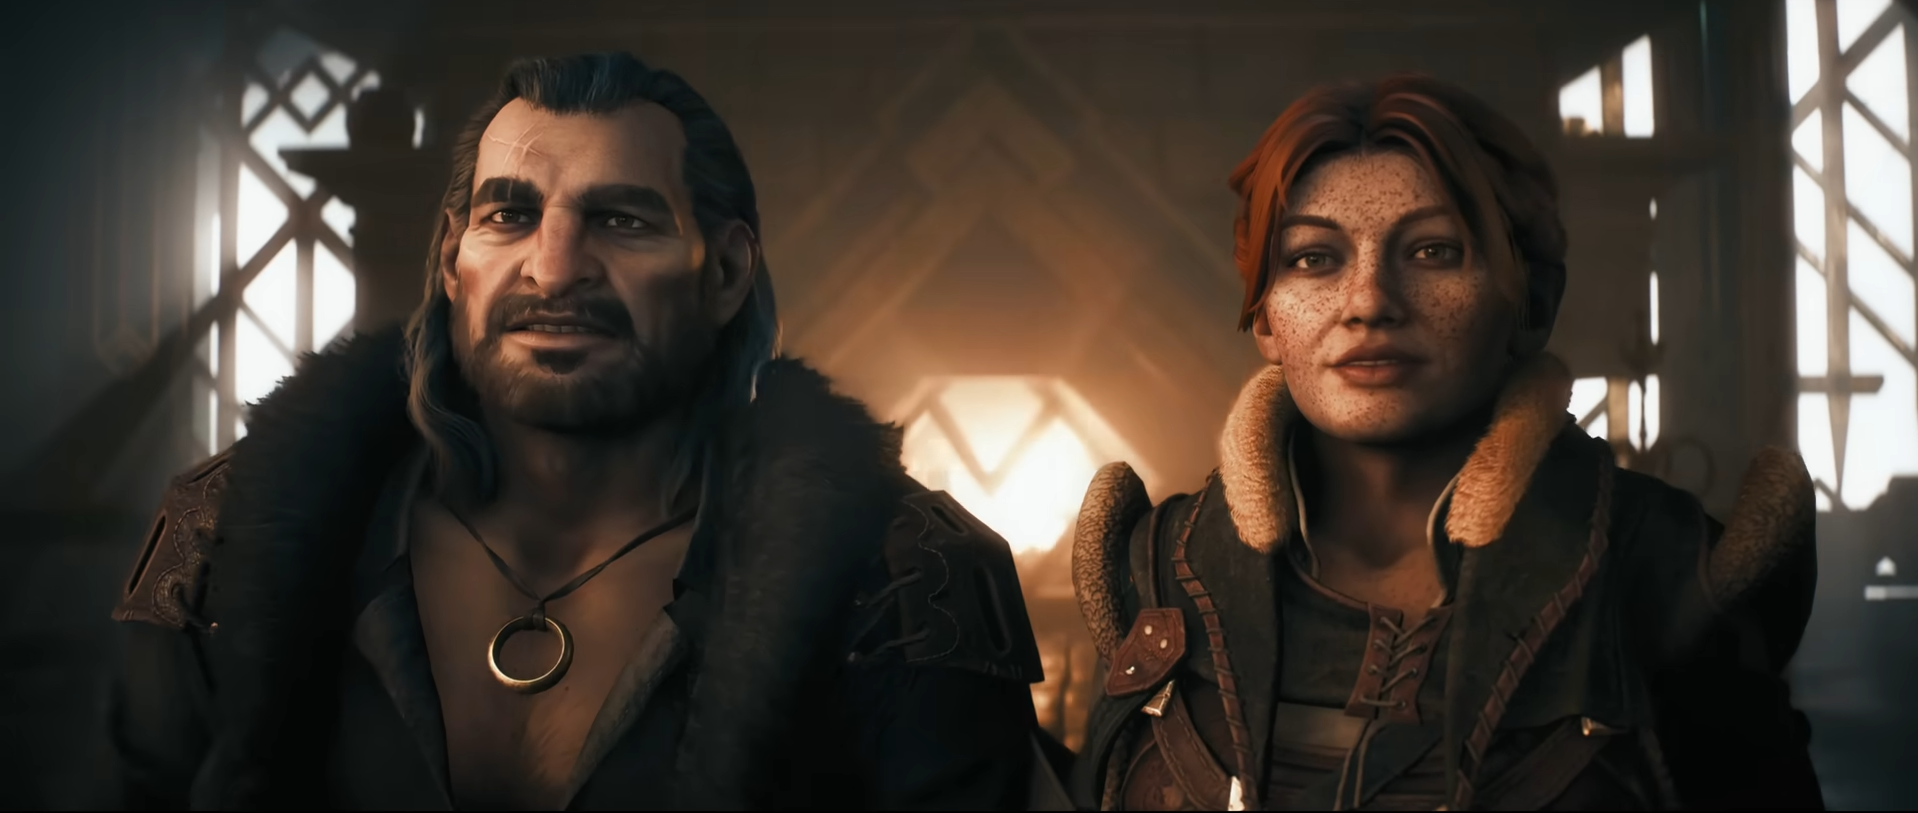 varric and harding from the trailer for dragon age: veilguard